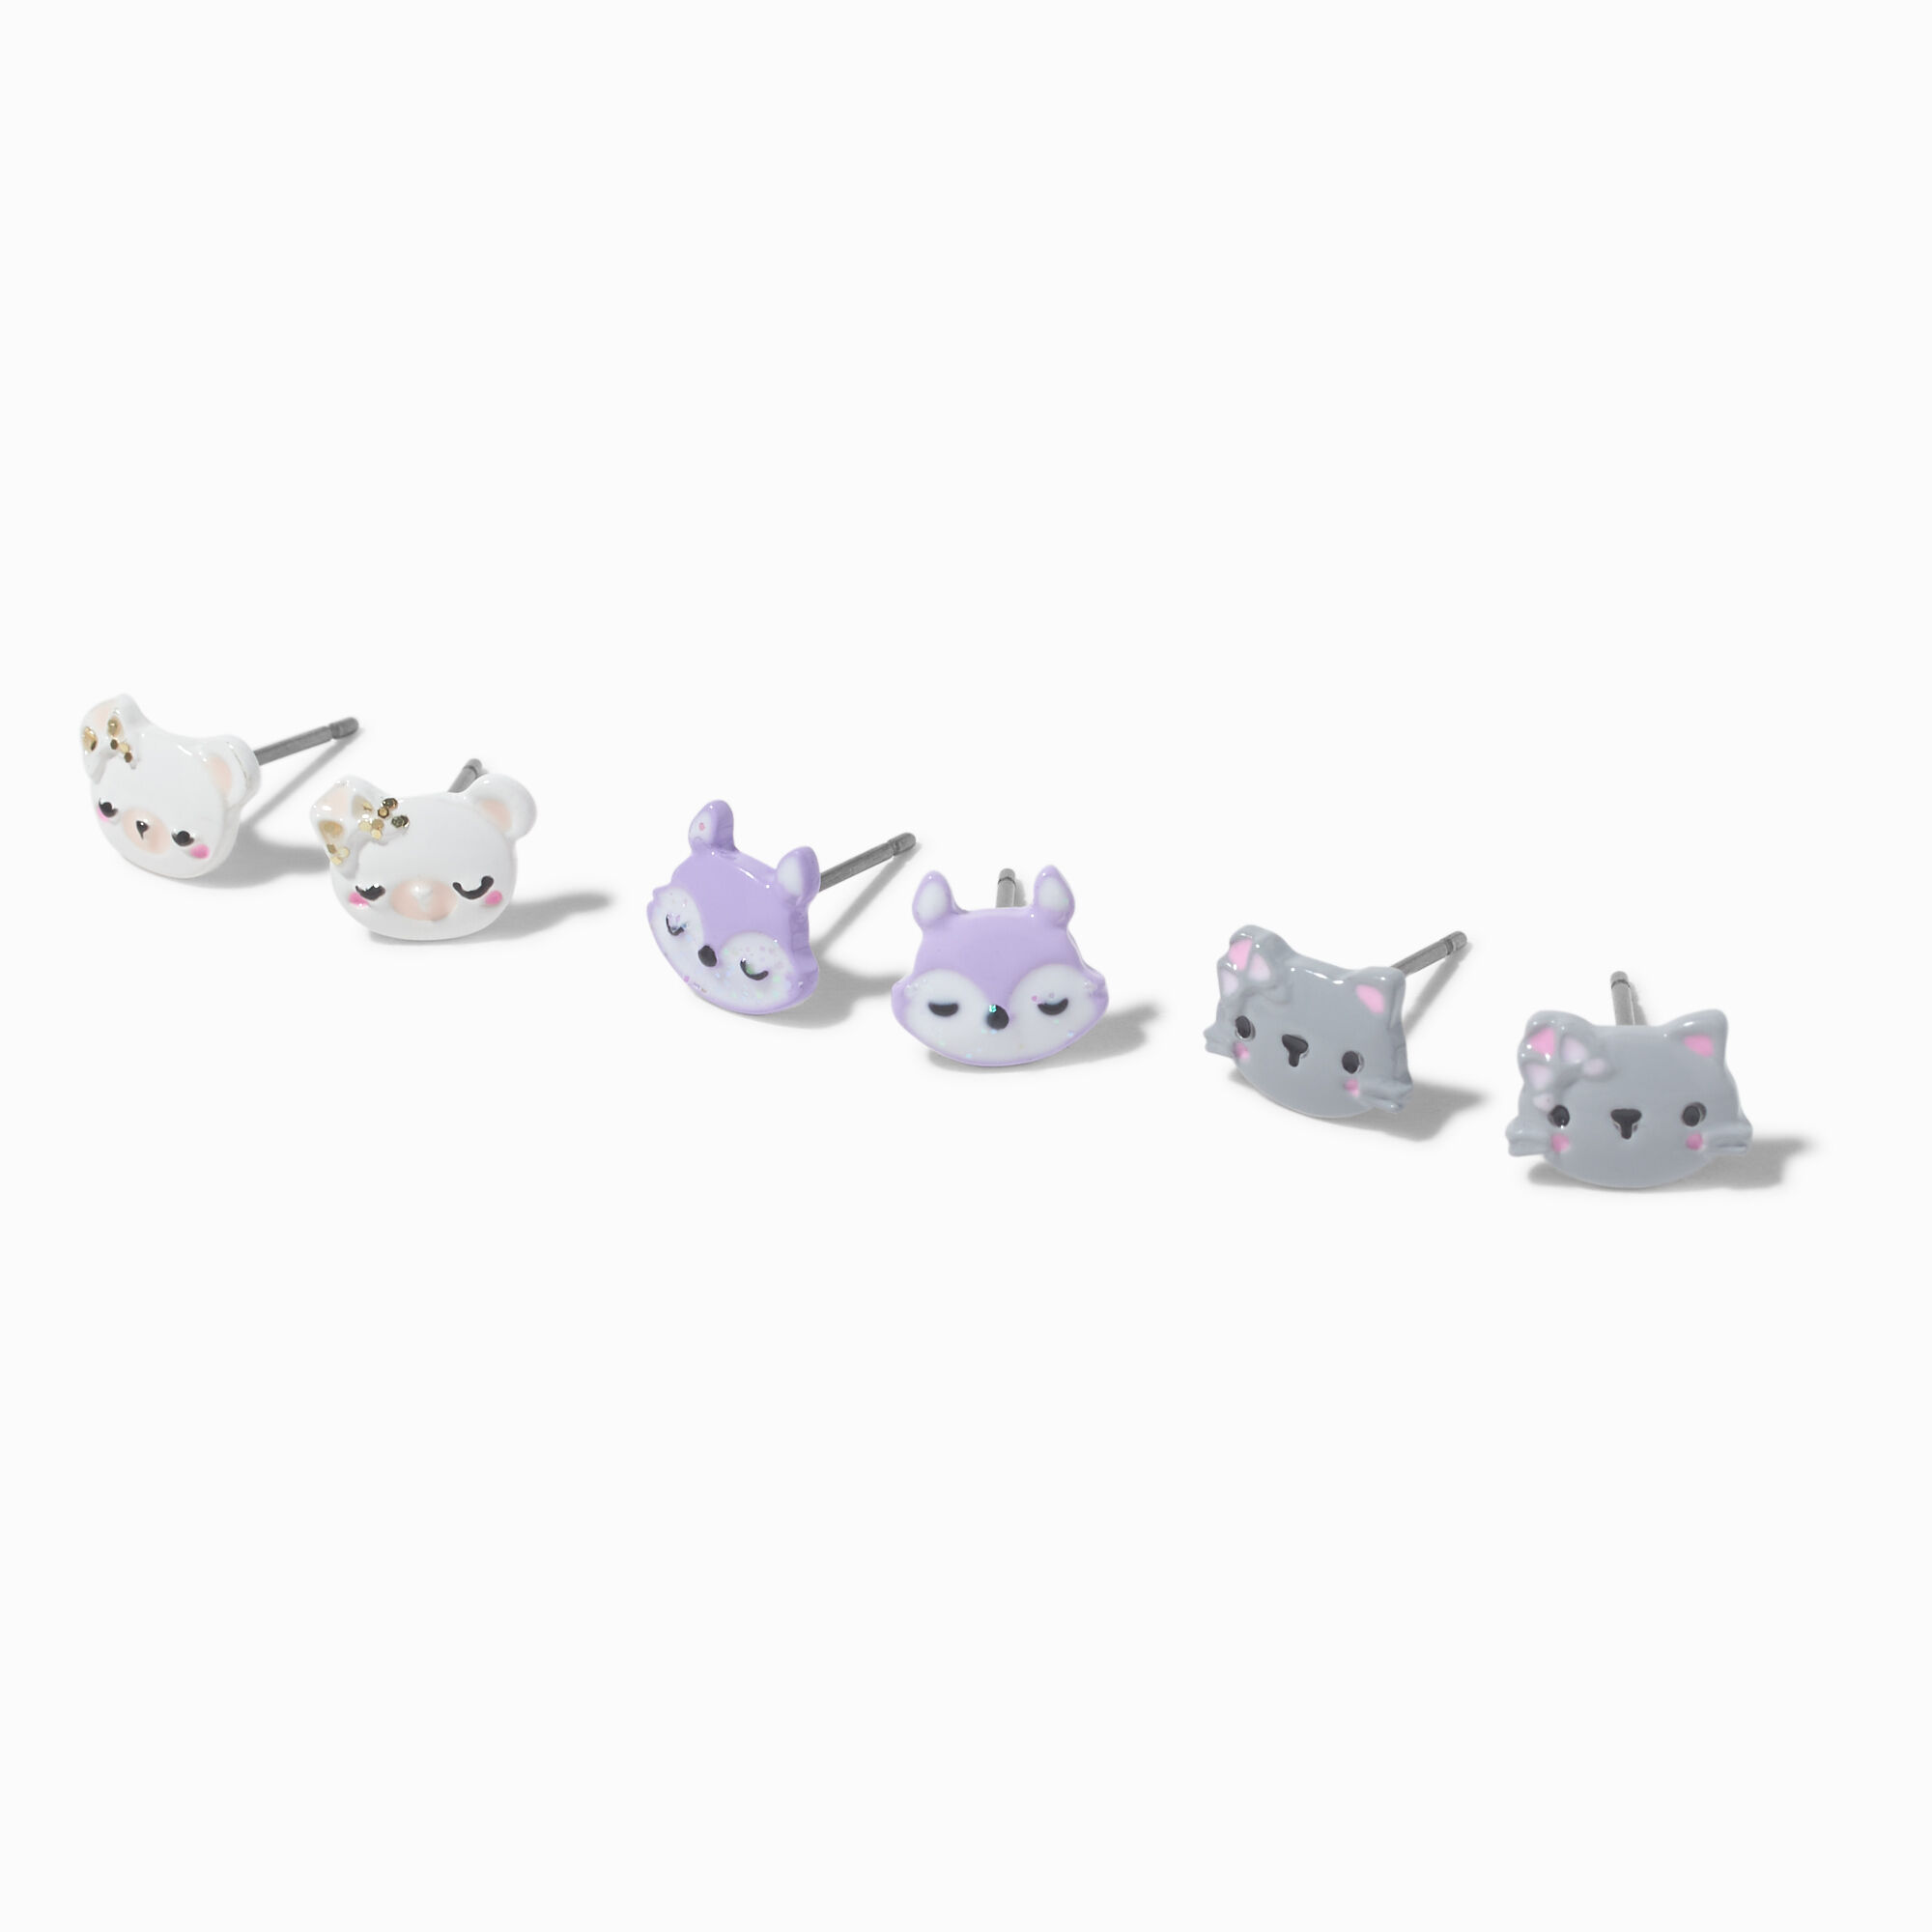 View Claires Pretty Critters Stud Earrings 3 Pack information